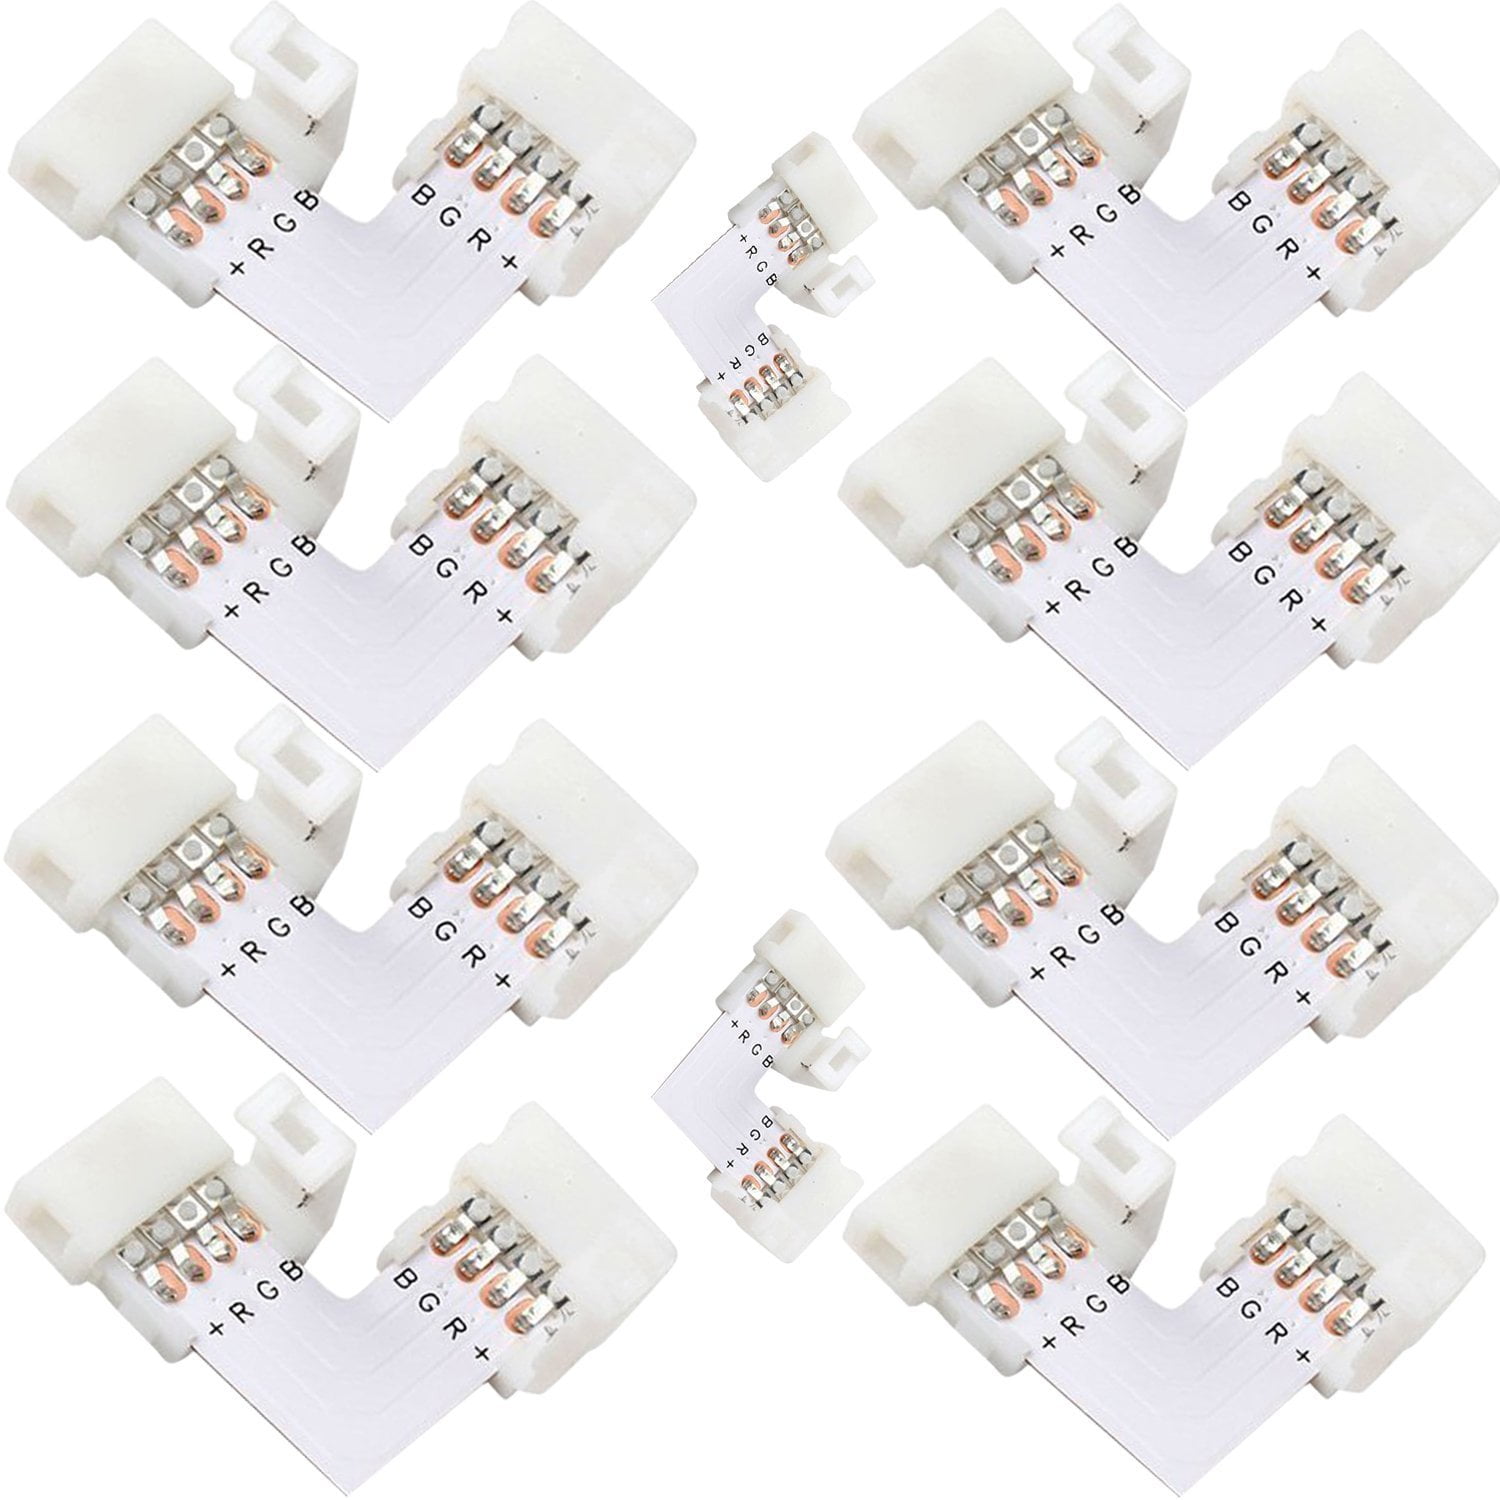 led strip connector 4 pin to 5 pin adapter